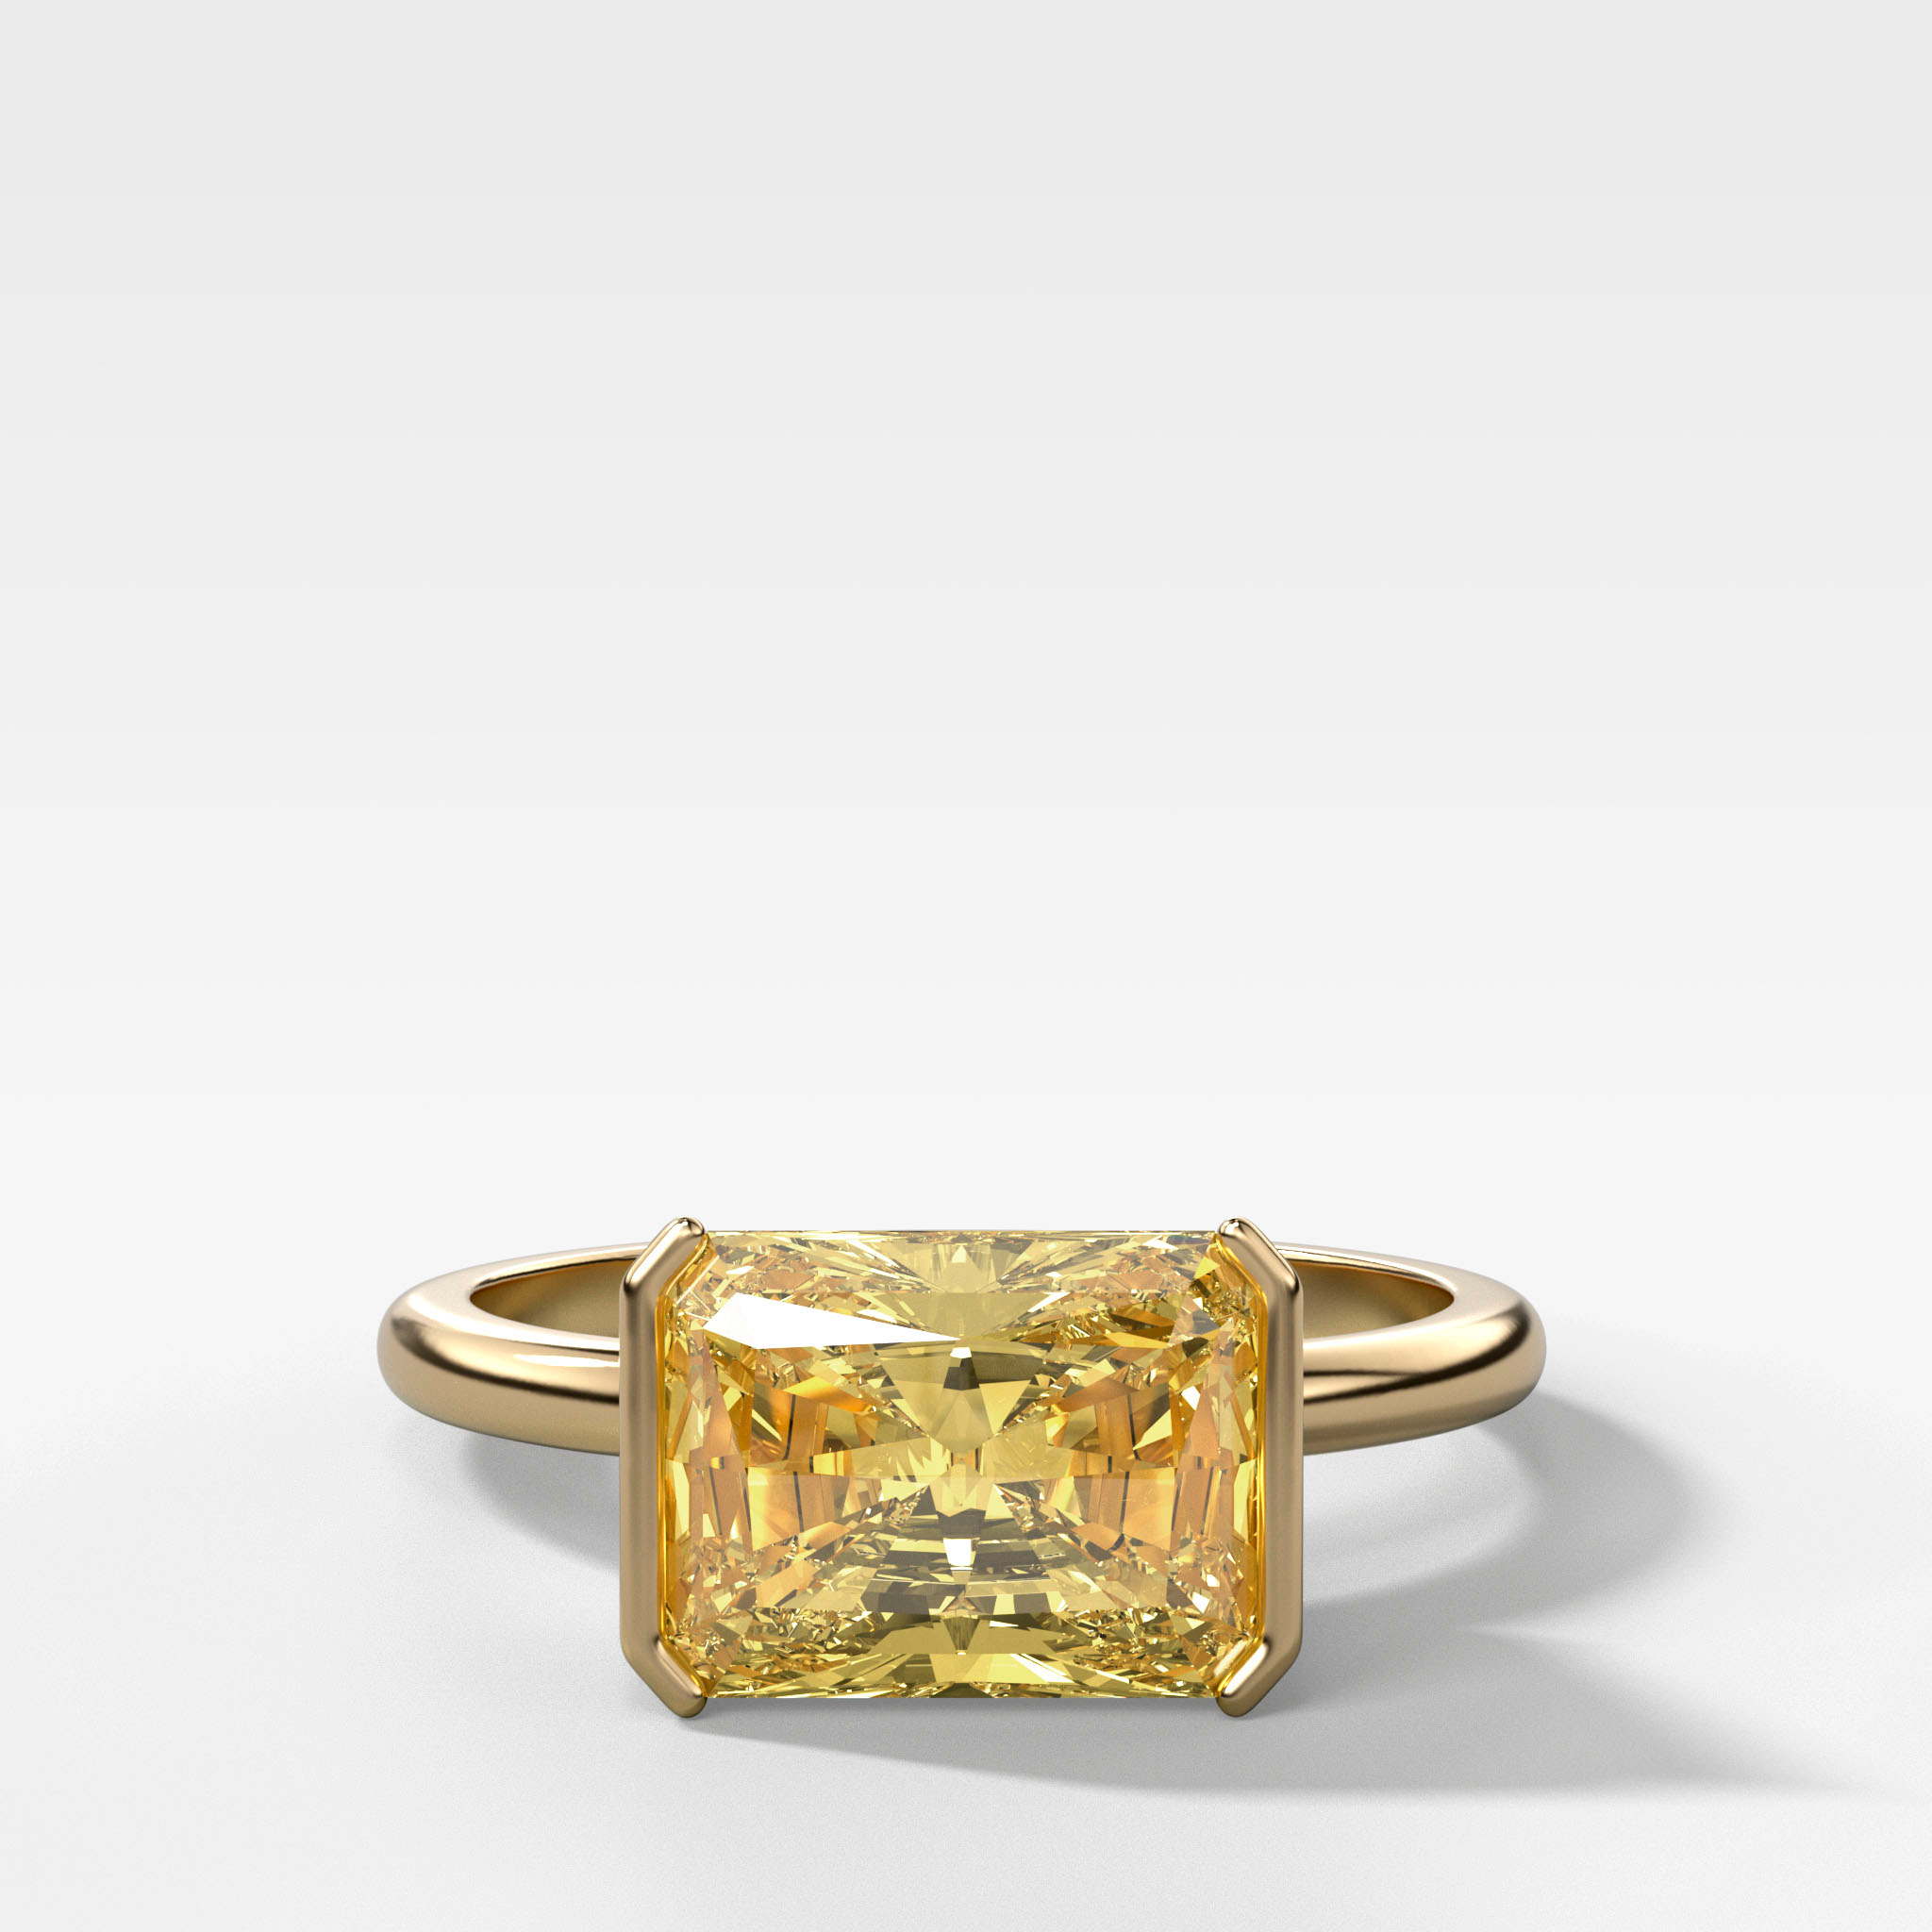 GOODSTONE East West Half Bezel Solitaire Engagement Ring With Canary Yellow Elongated Radiant Cut Diamond